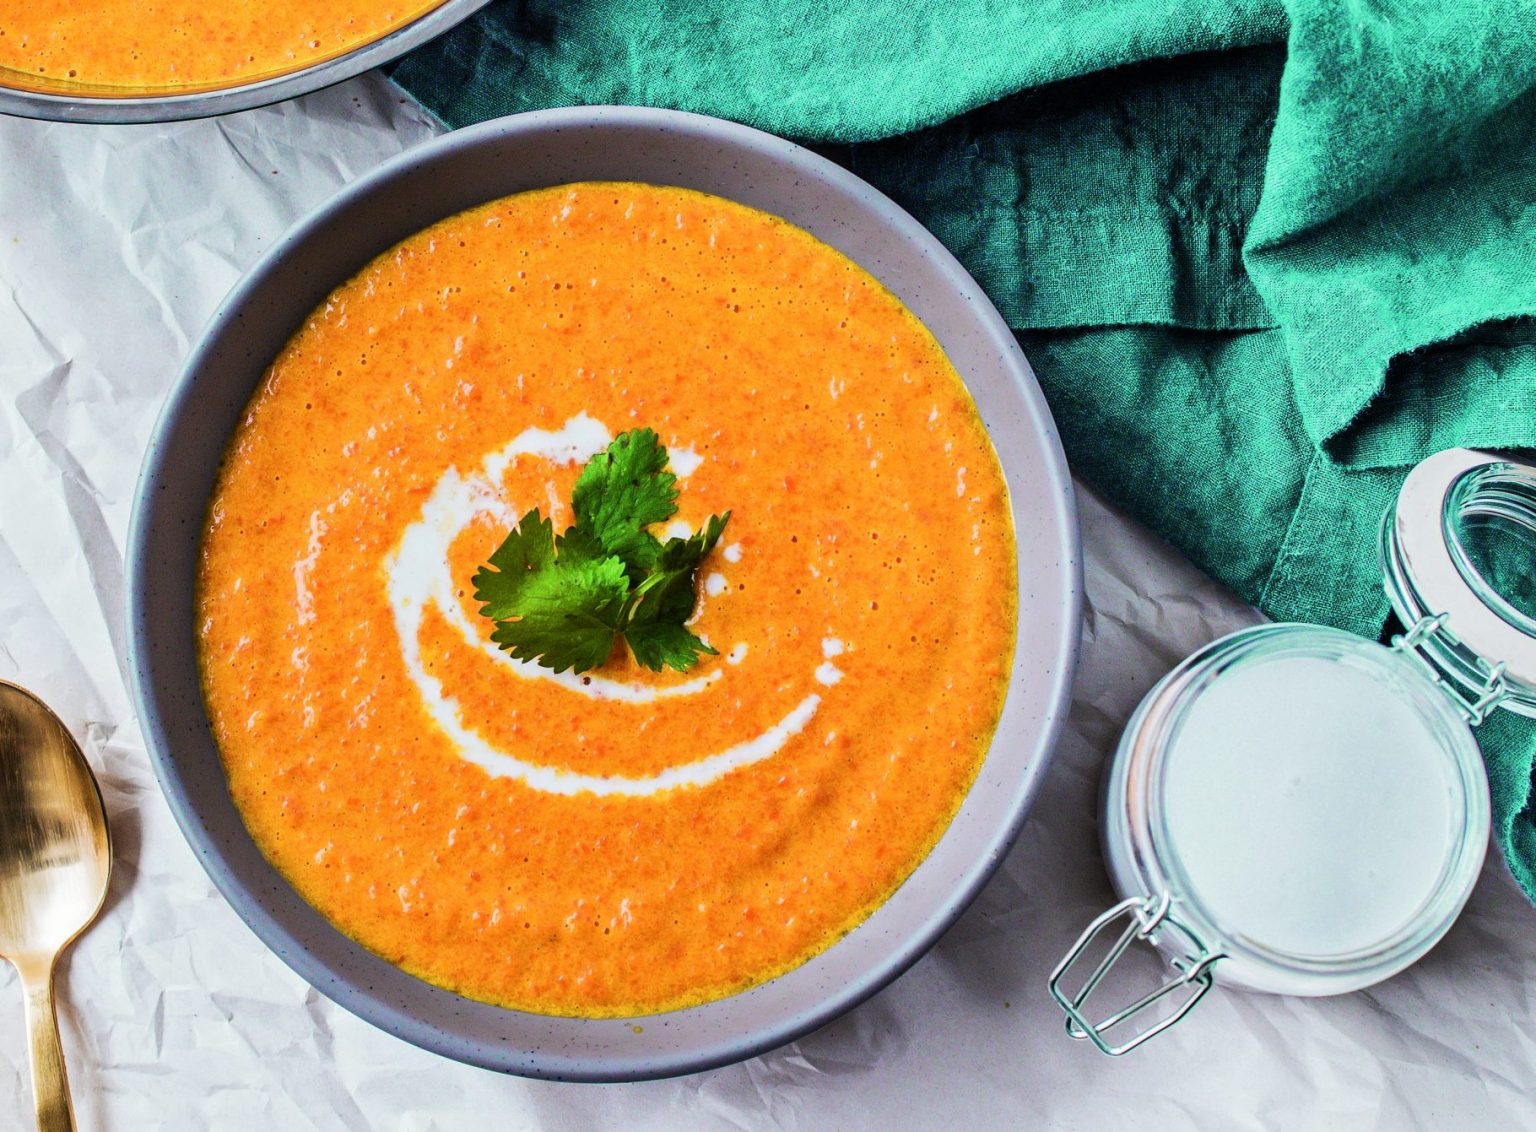 From Roasted Carrot Curried Soup to Apple Crisp: Our Top Eight Vegan Recipes of the Day!